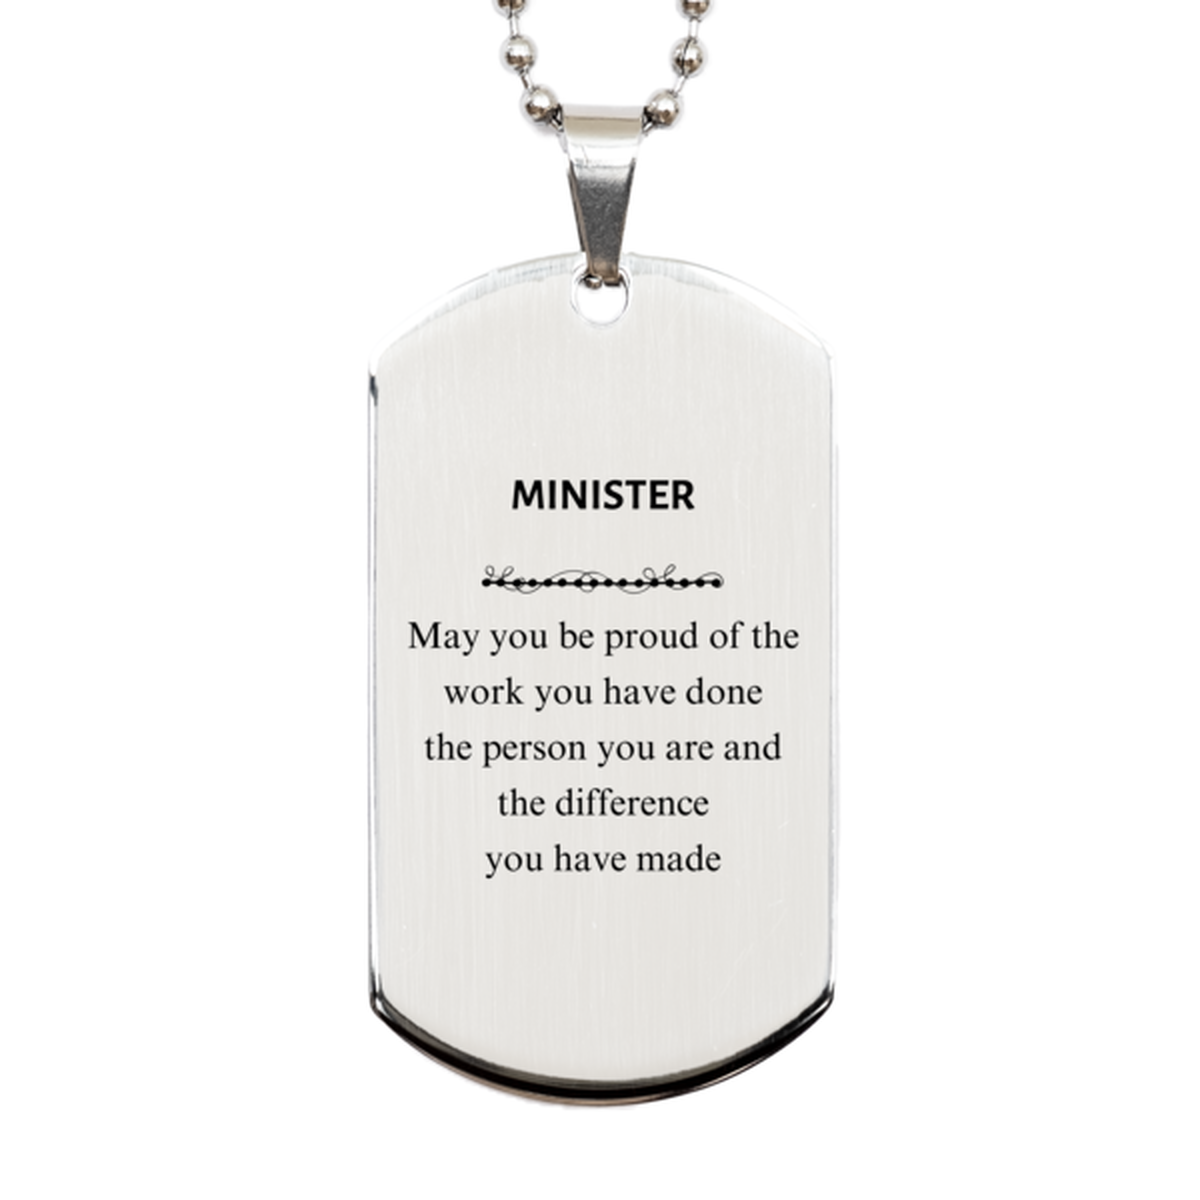 Minister May you be proud of the work you have done, Retirement Minister Silver Dog Tag for Colleague Appreciation Gifts Amazing for Minister